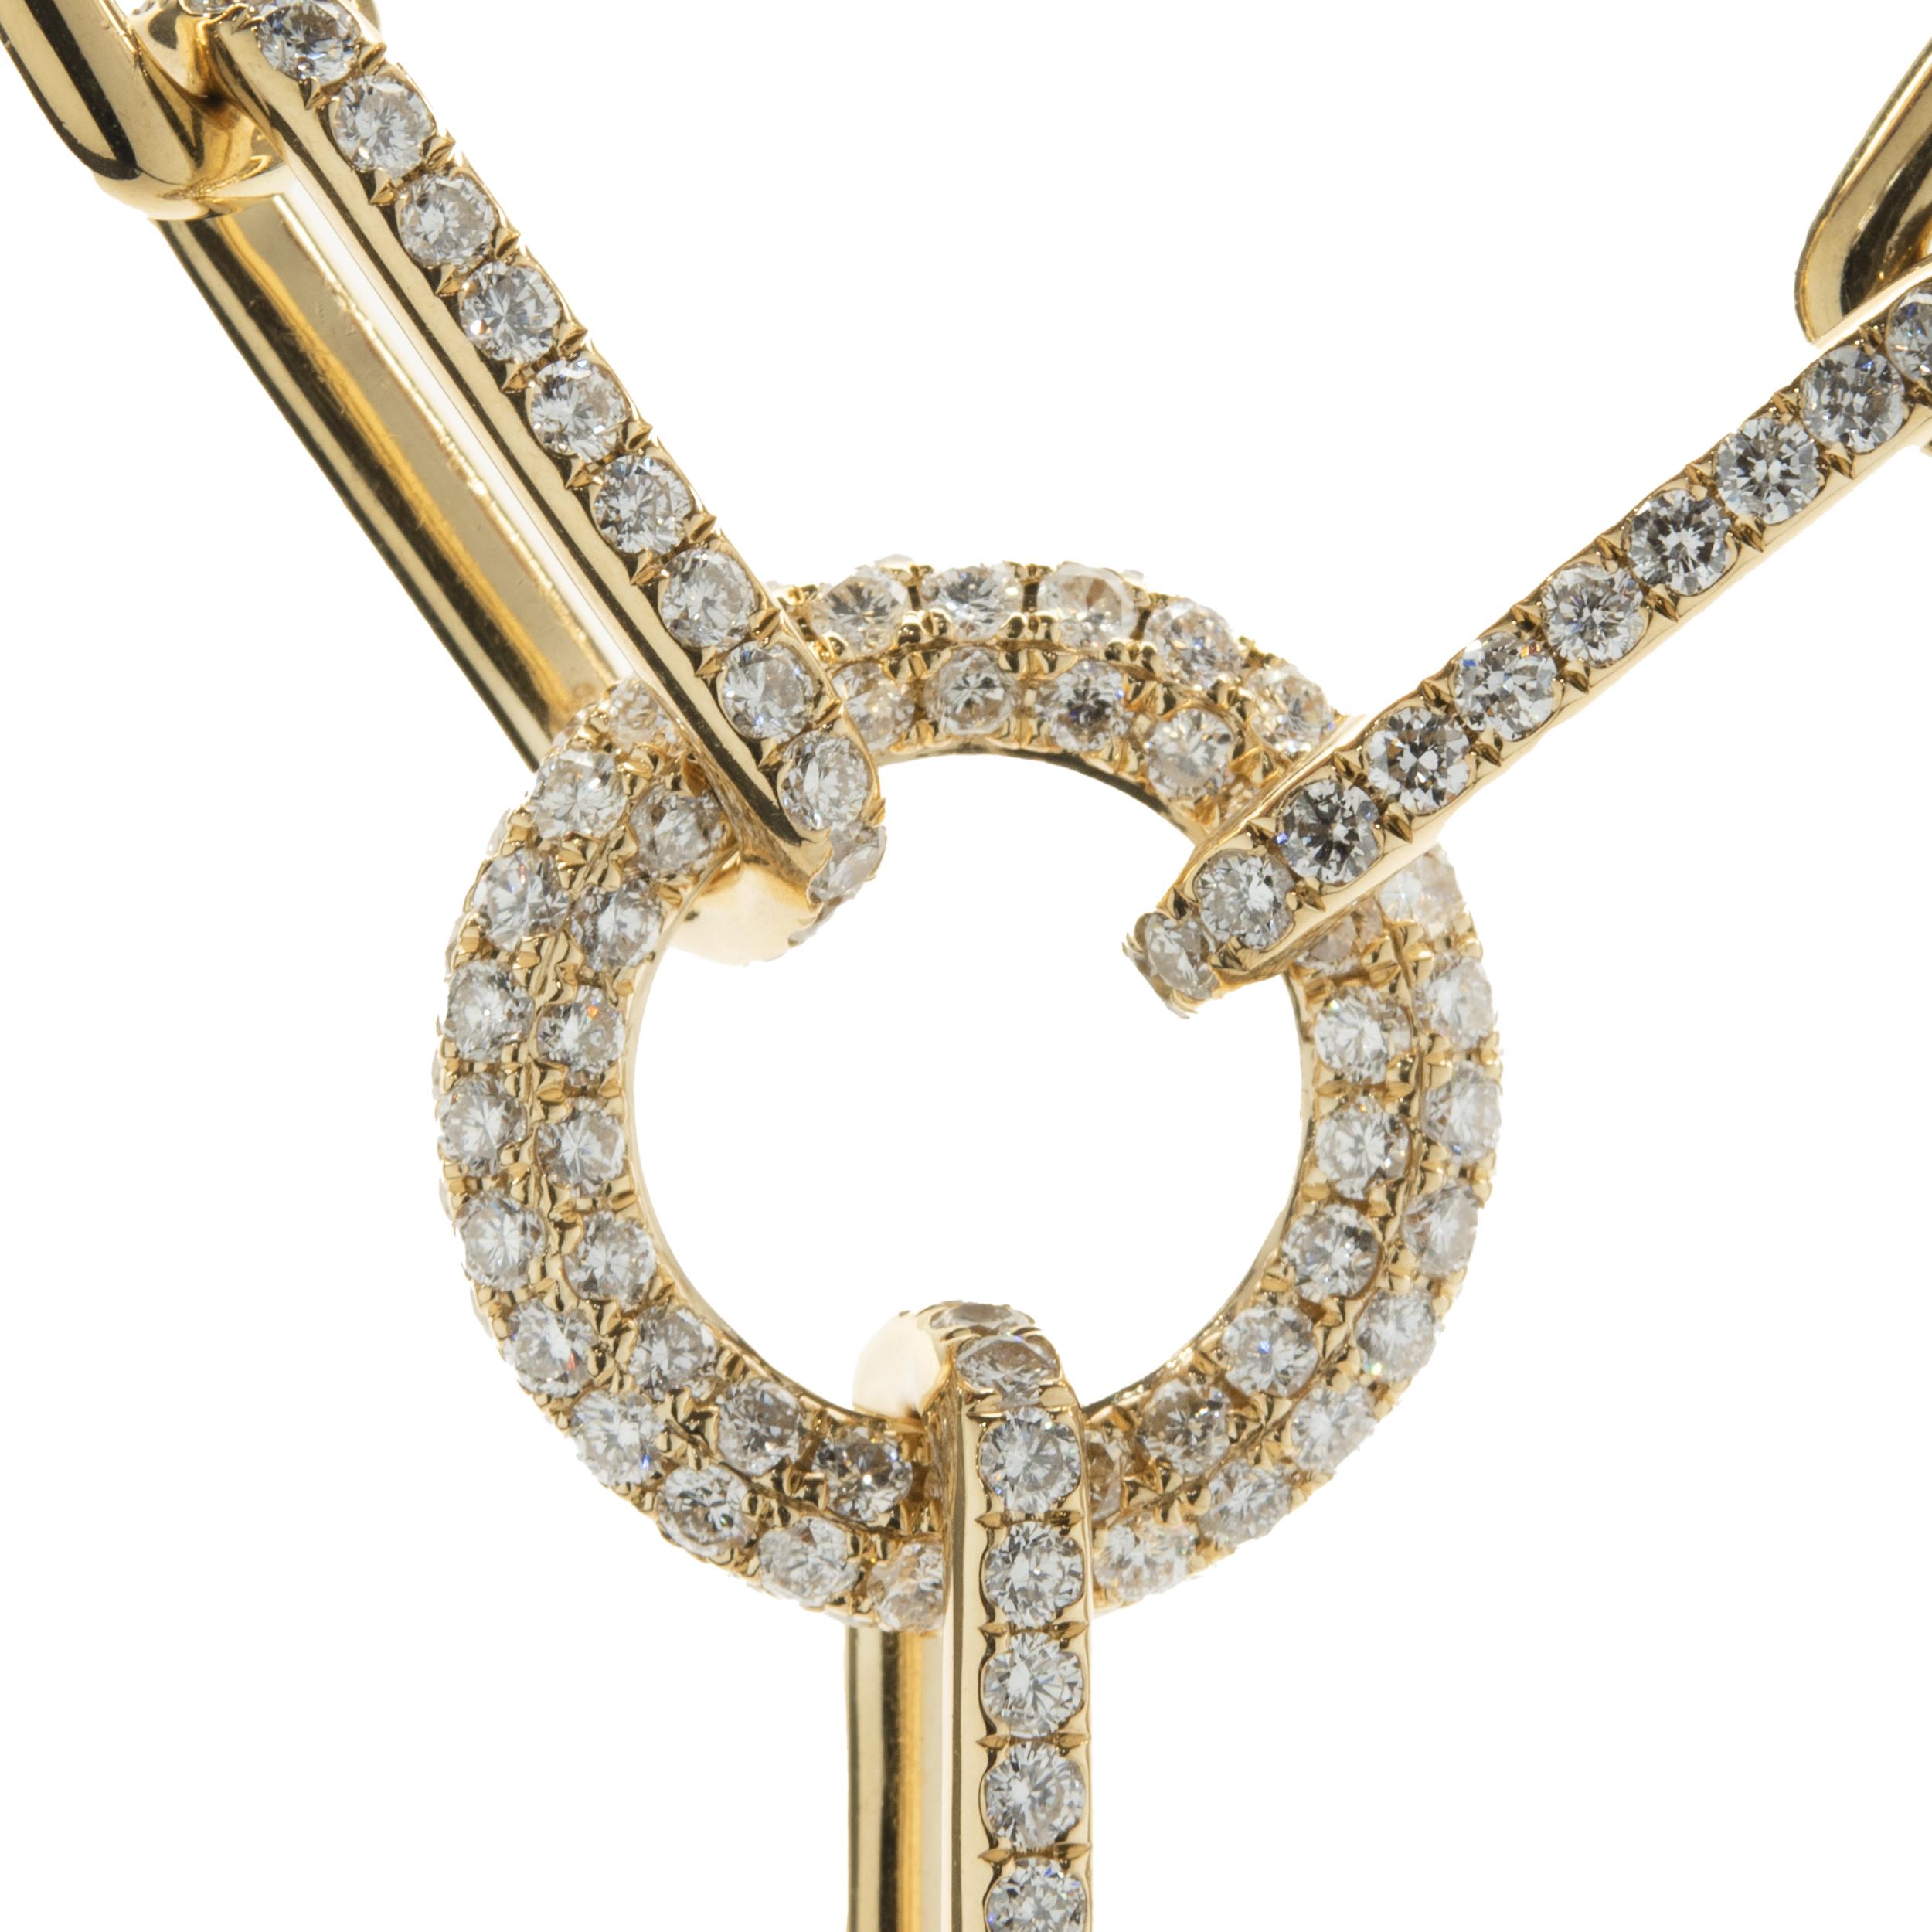 Designer: custom design
Material: 18K yellow gold 
Diamond: 336 round brilliant cut = 5.75cttw
Color: G 
Clarity: VS2
Dimensions: necklace measures 18-inches in length
Weight: 63.38 grams
